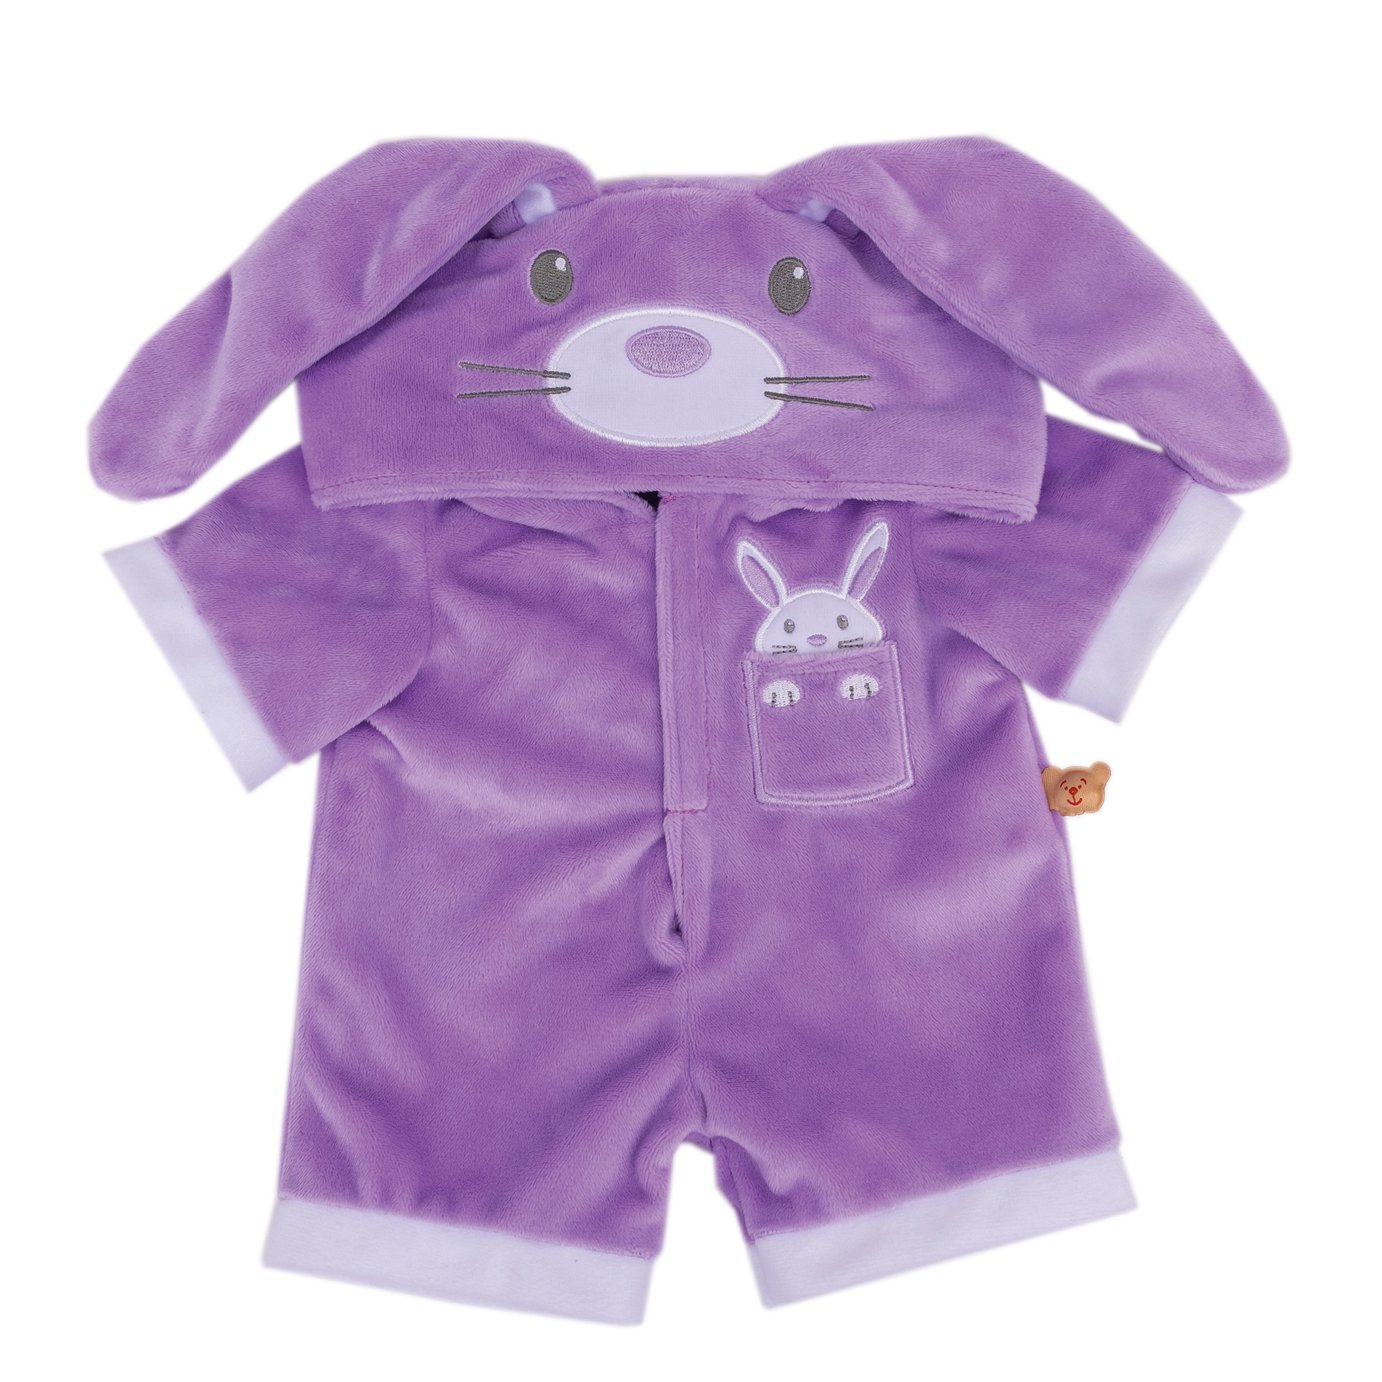 DesignaBear Bunny All In One Dolls Outfit review